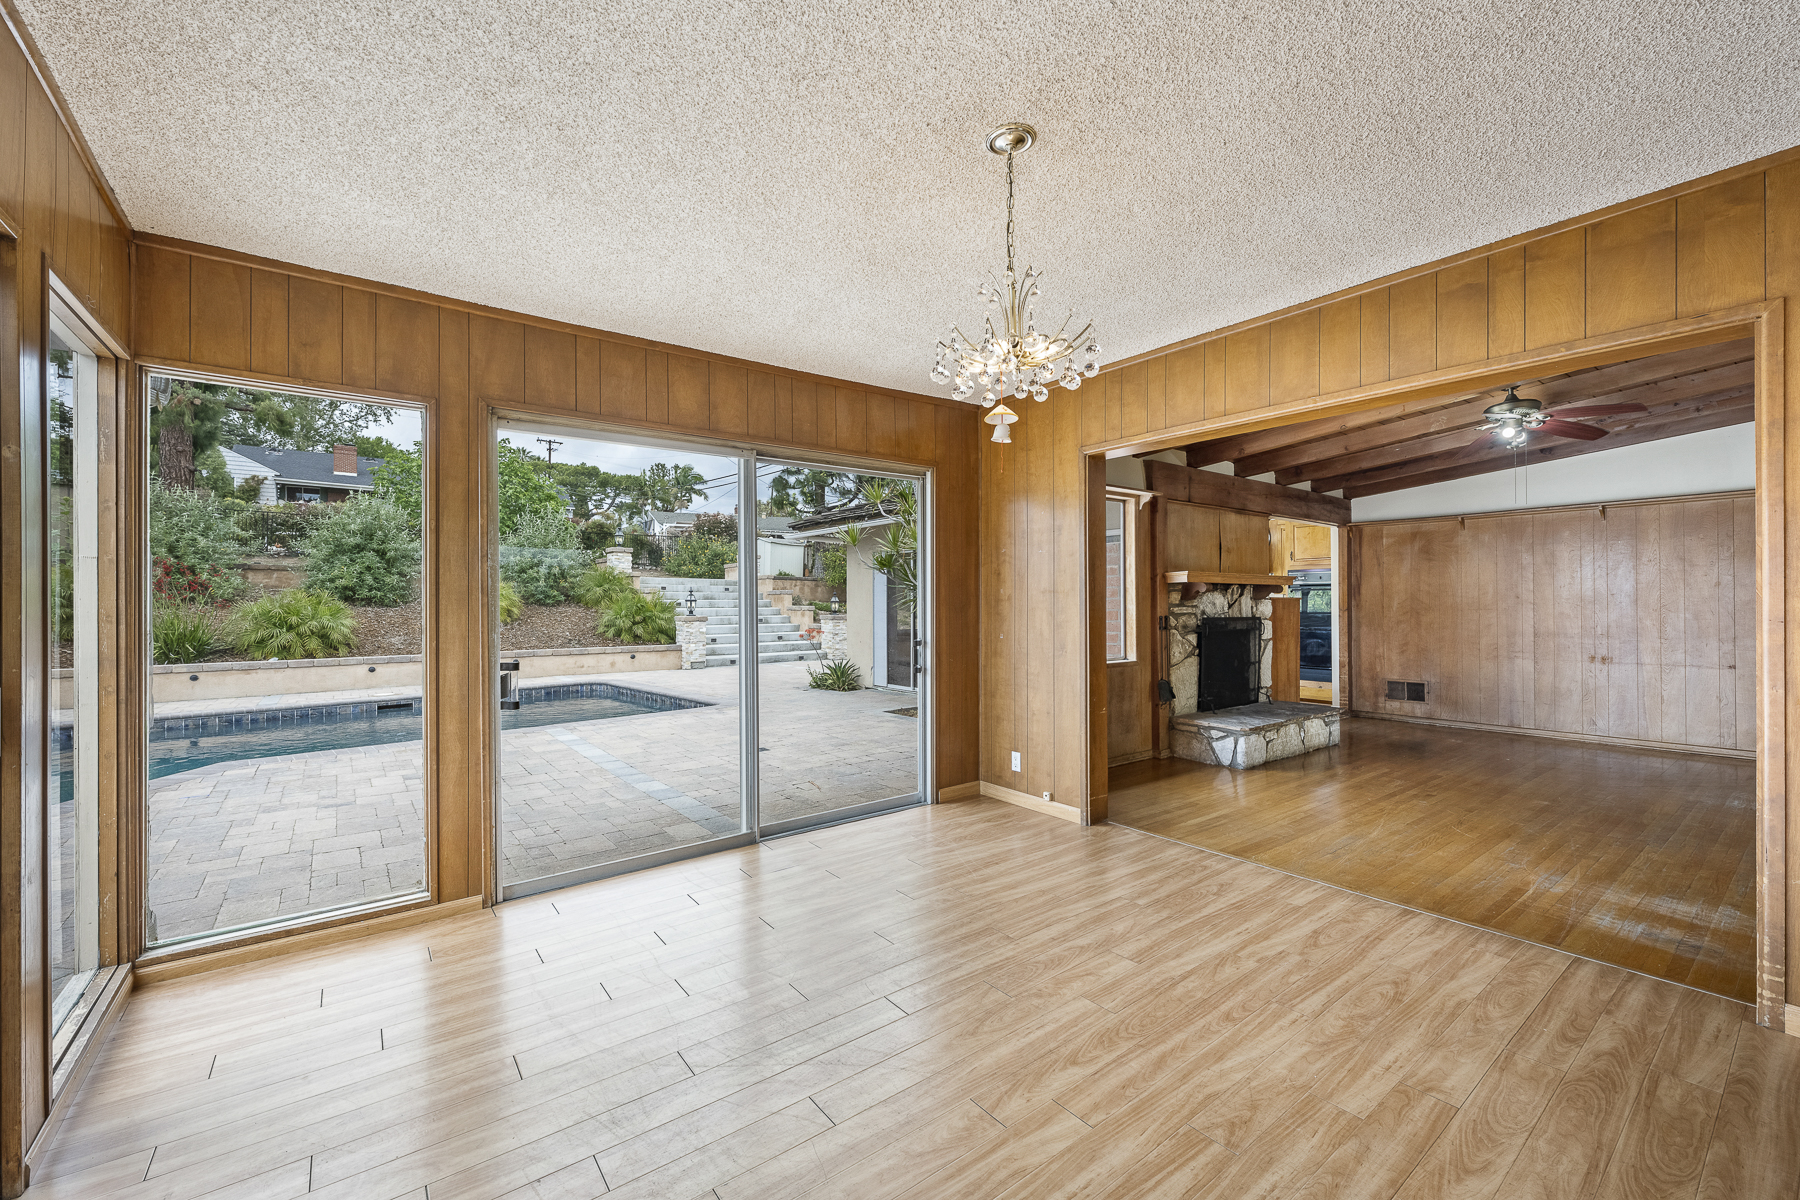 501 Dorothy Drive: Dining room with view of patio and pool